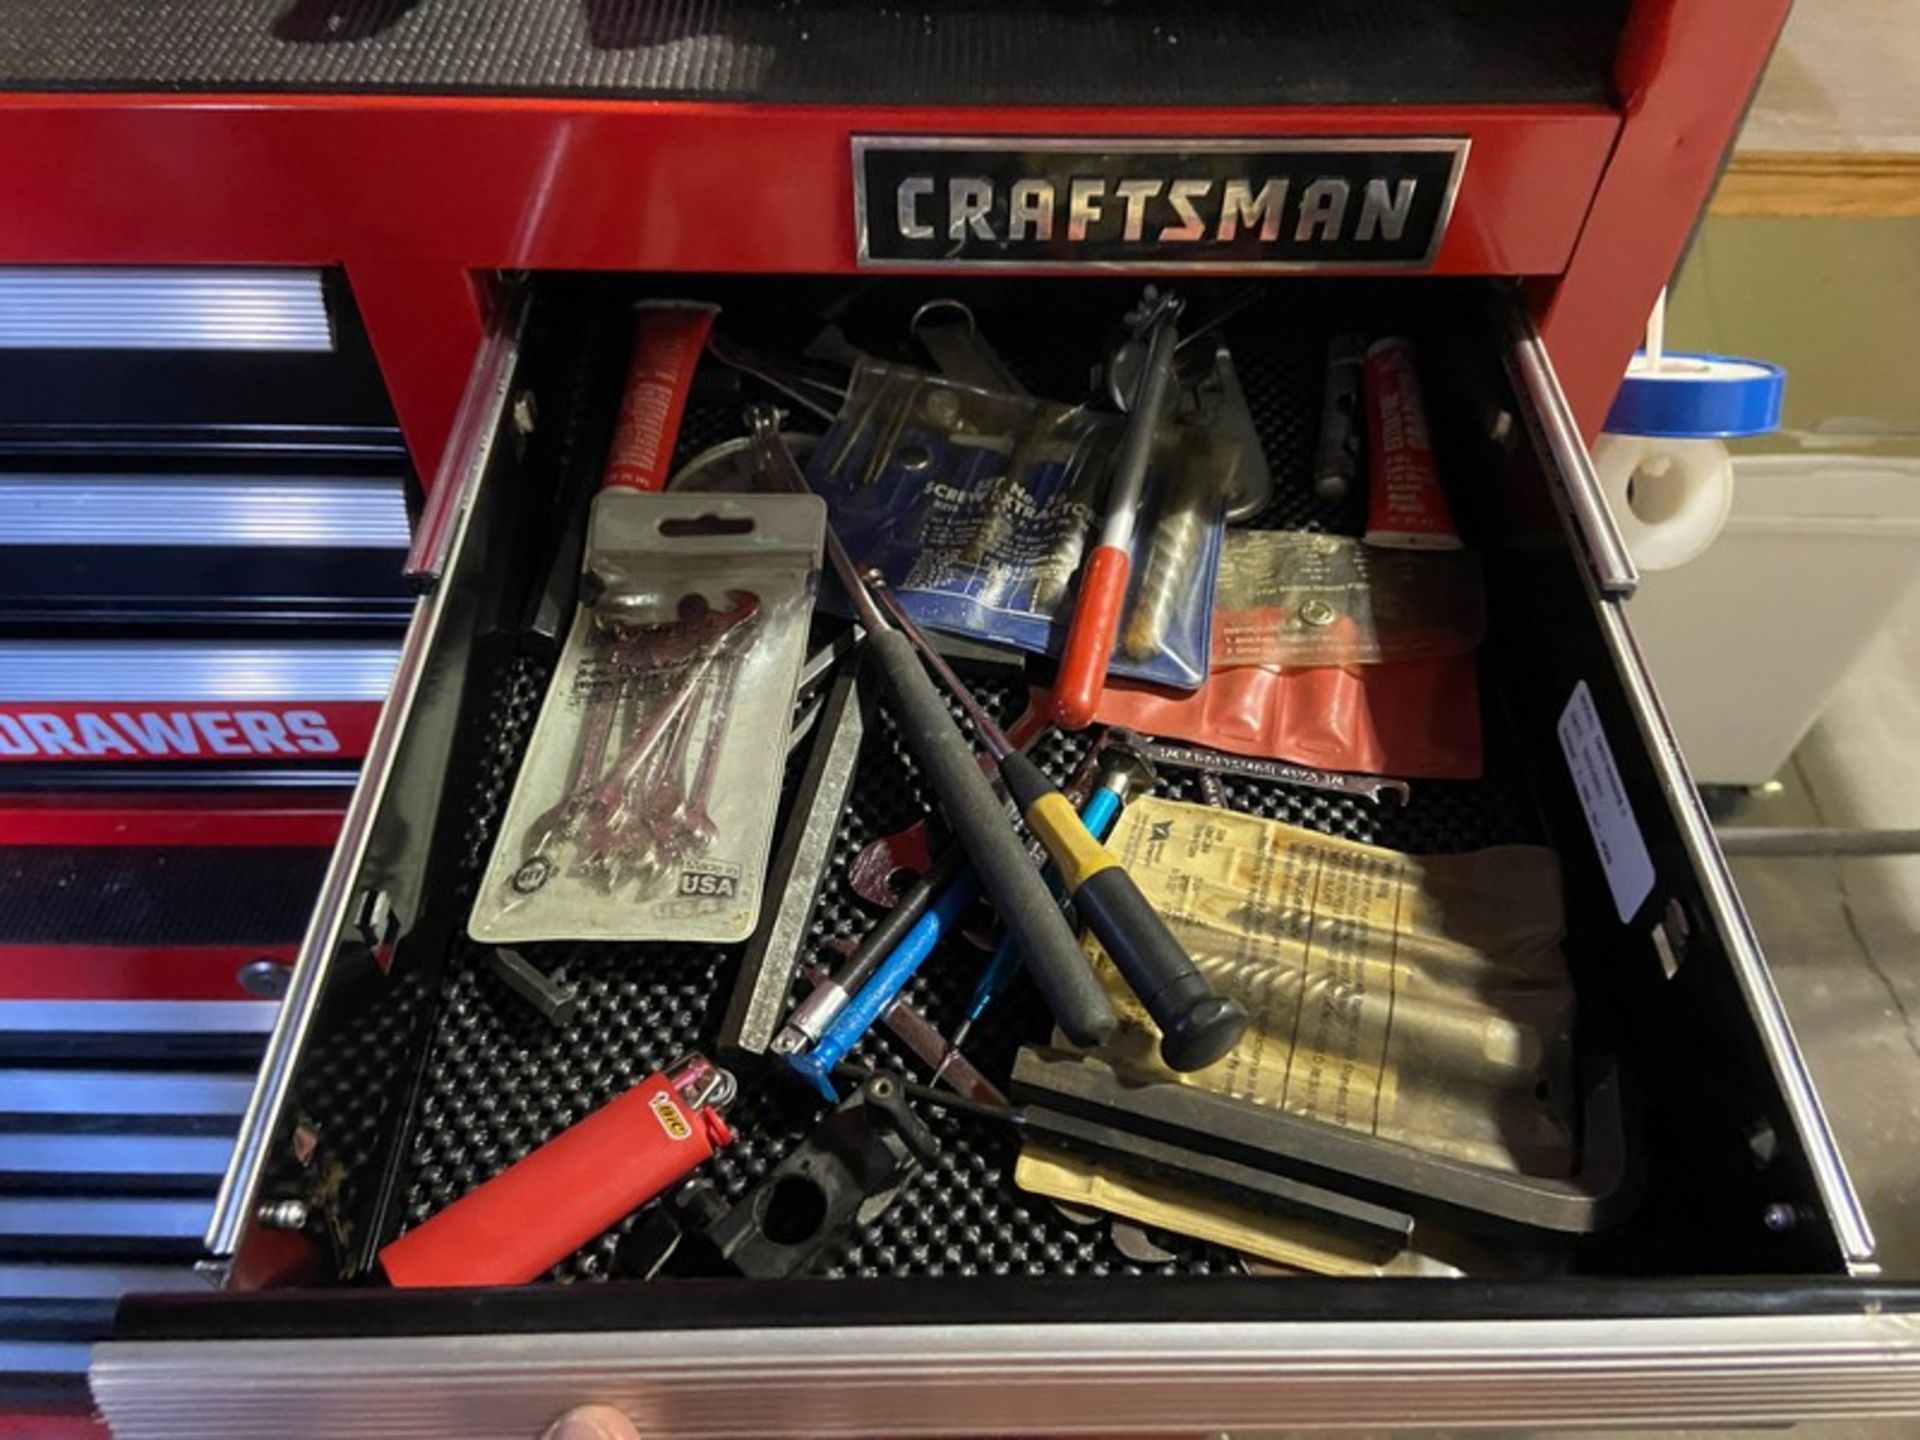 CRAFTSMAN PORTABLE TOOLBOX WITH CONTENTS, INCLUES MONKEY WRENCHES, WRENCHES, SCREW DRIVERS, & OTHER - Image 7 of 15